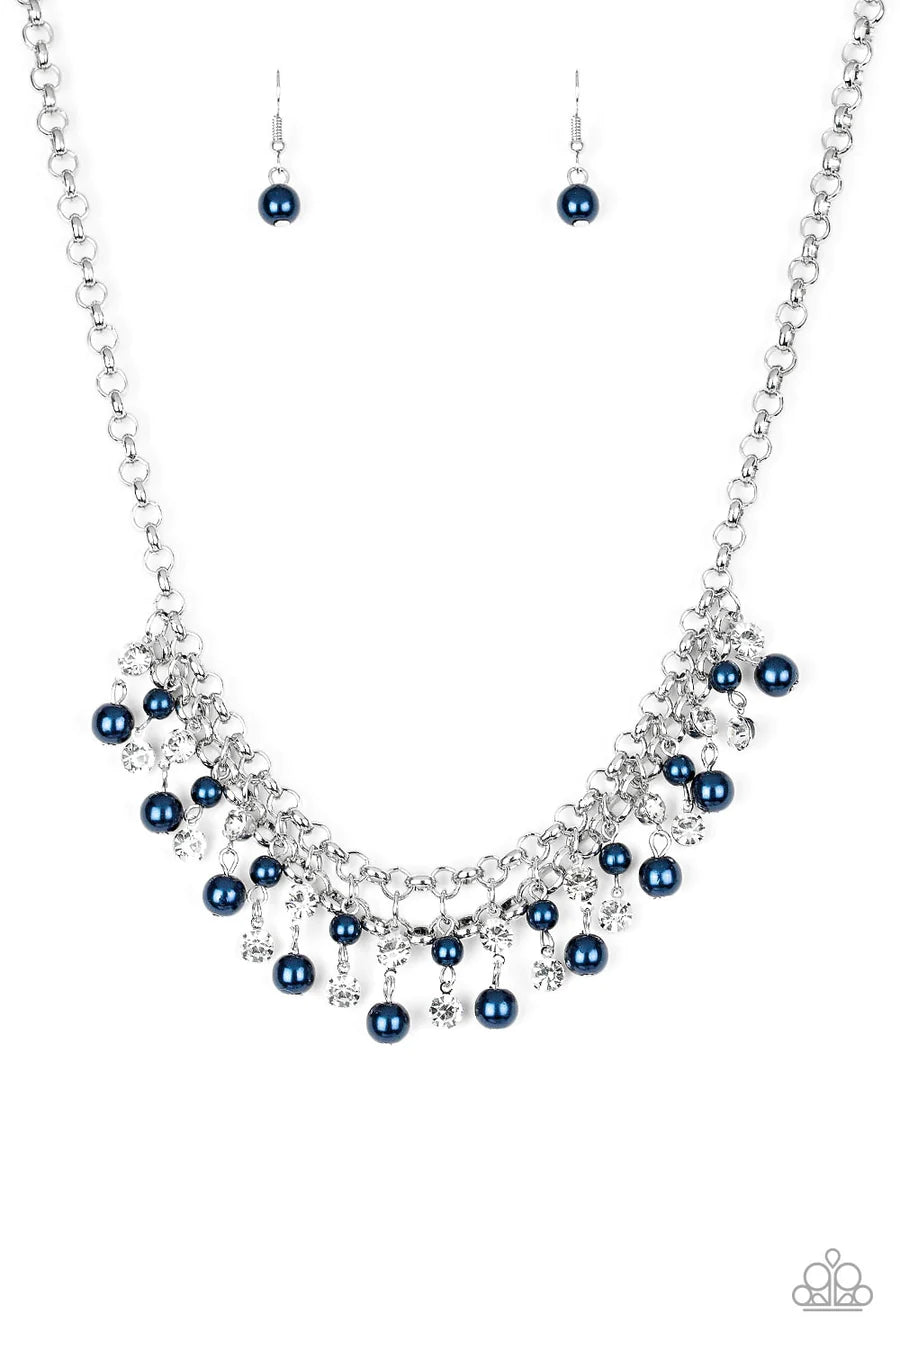 Paparazzi “You May Kiss the Bride” Blue Pearl Fringe Necklace